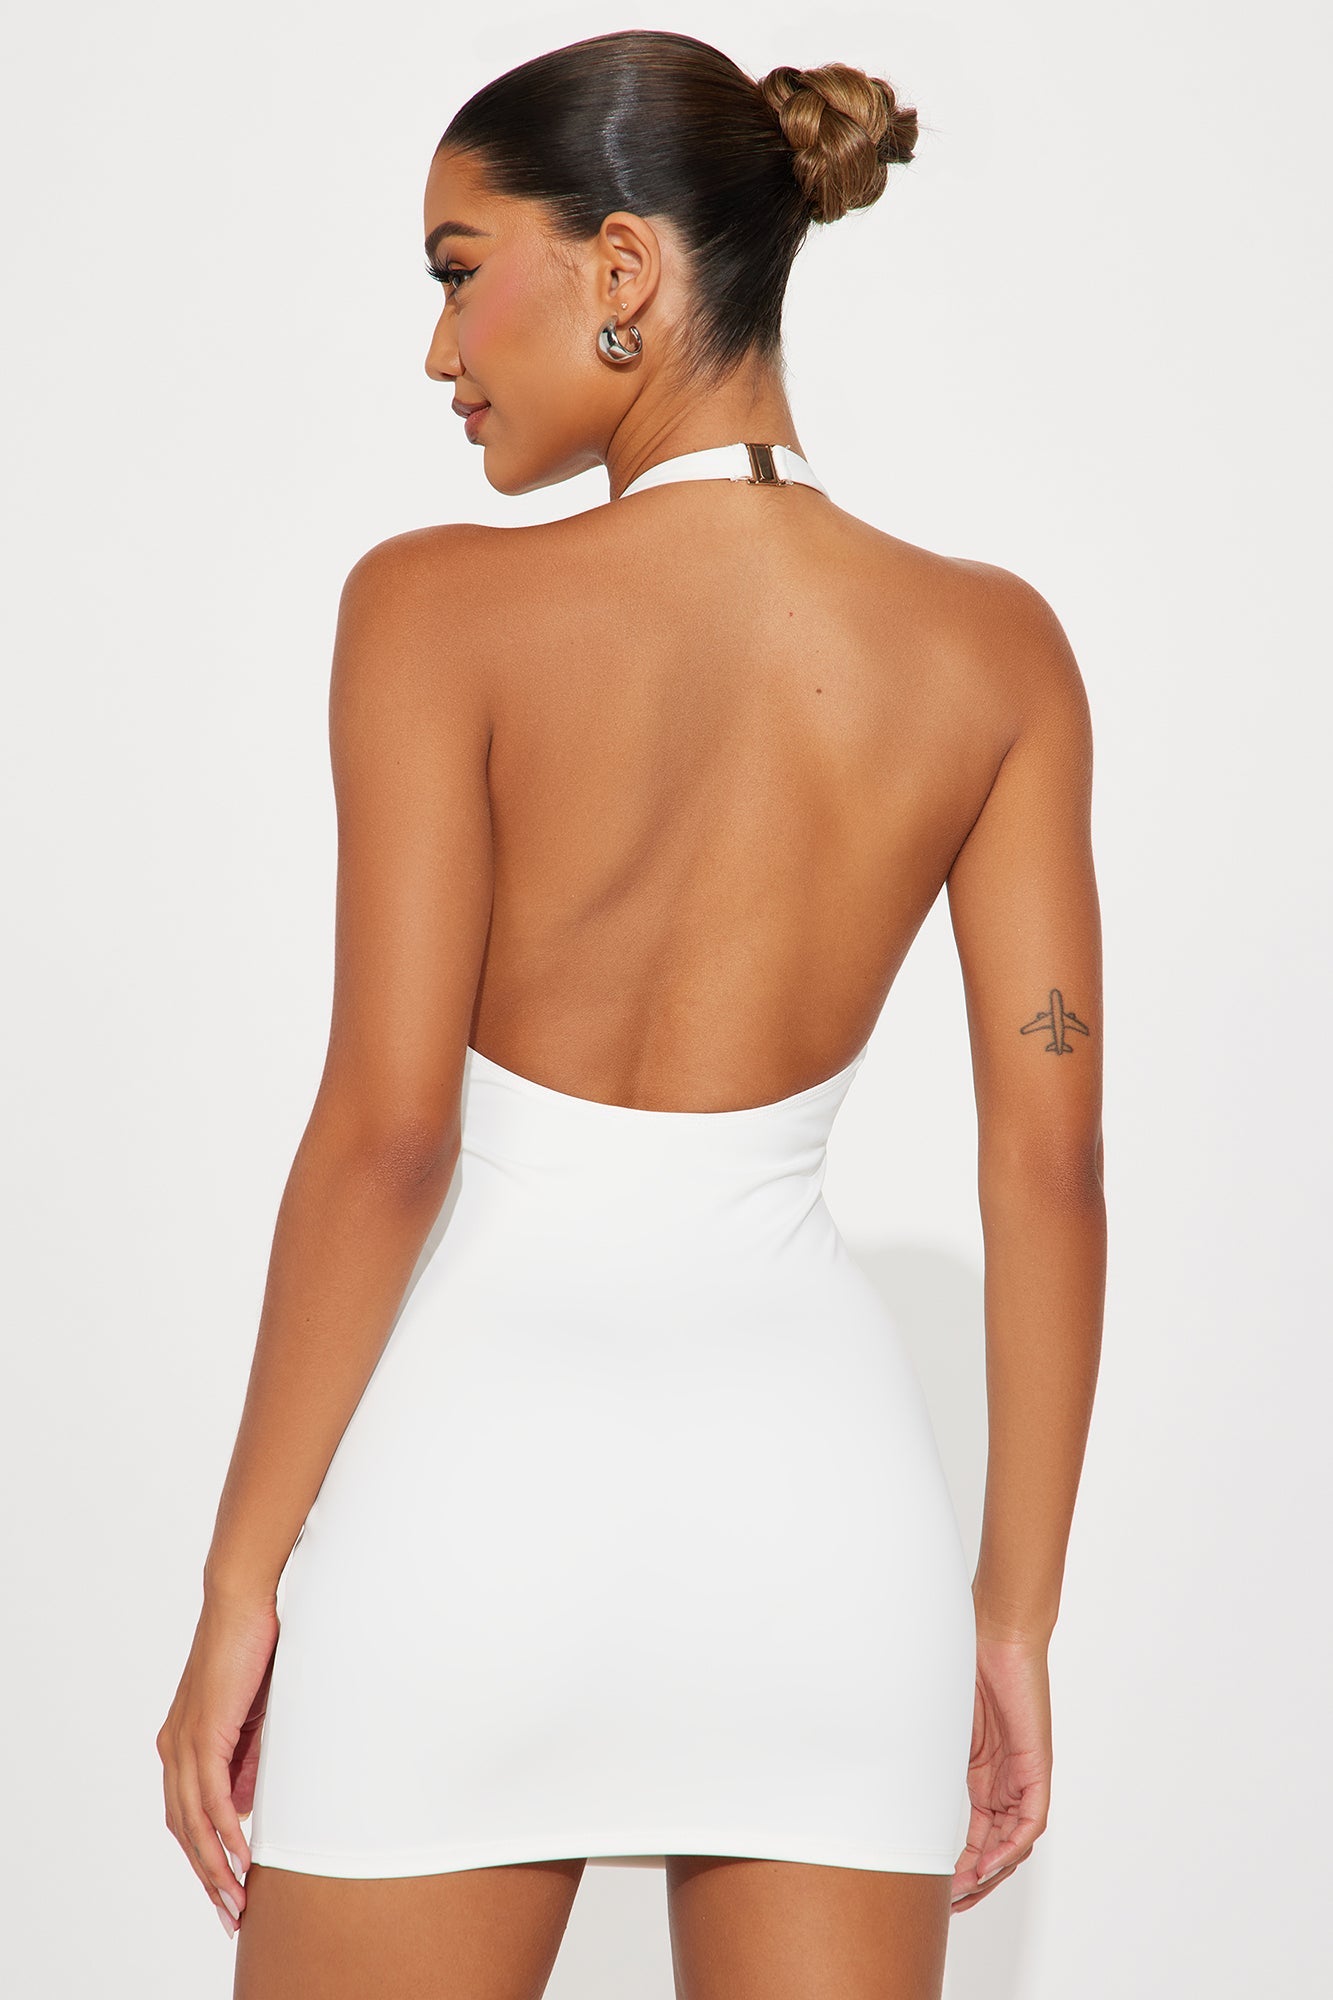 Flo 2X Lined Micro Mini Dress in White: The Perfect Summer Staple